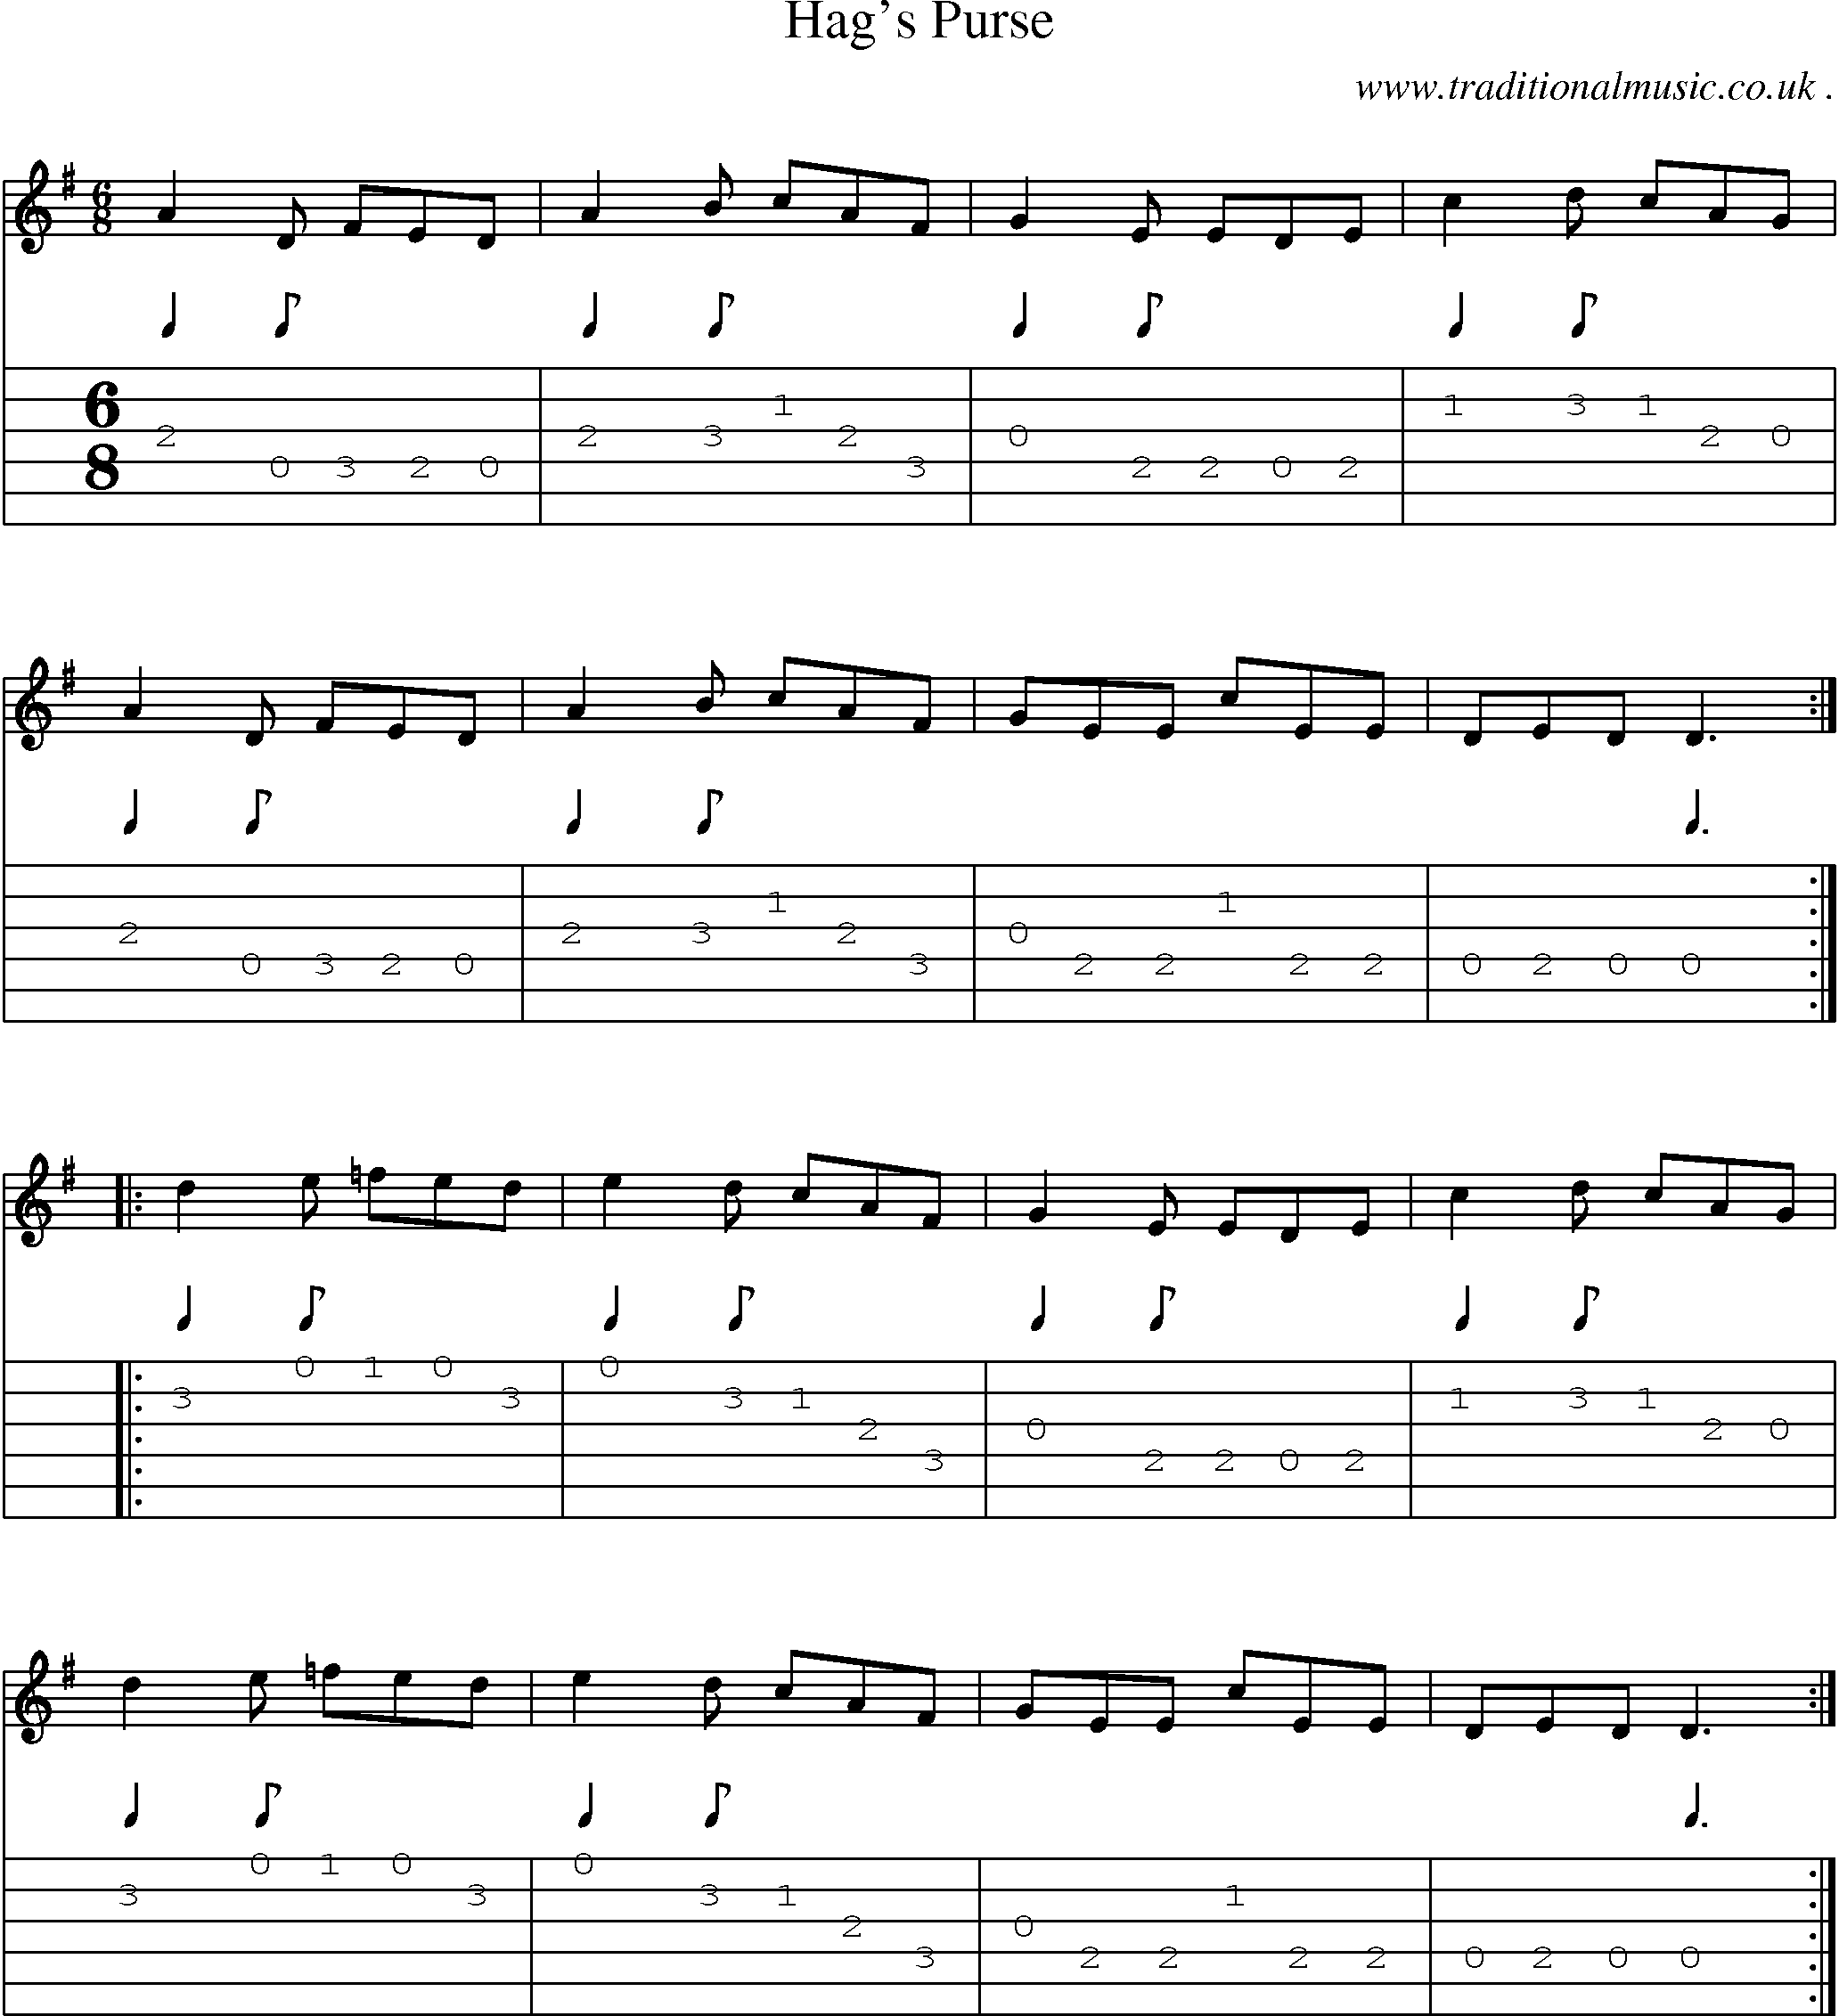 Sheet-Music and Guitar Tabs for Hags Purse